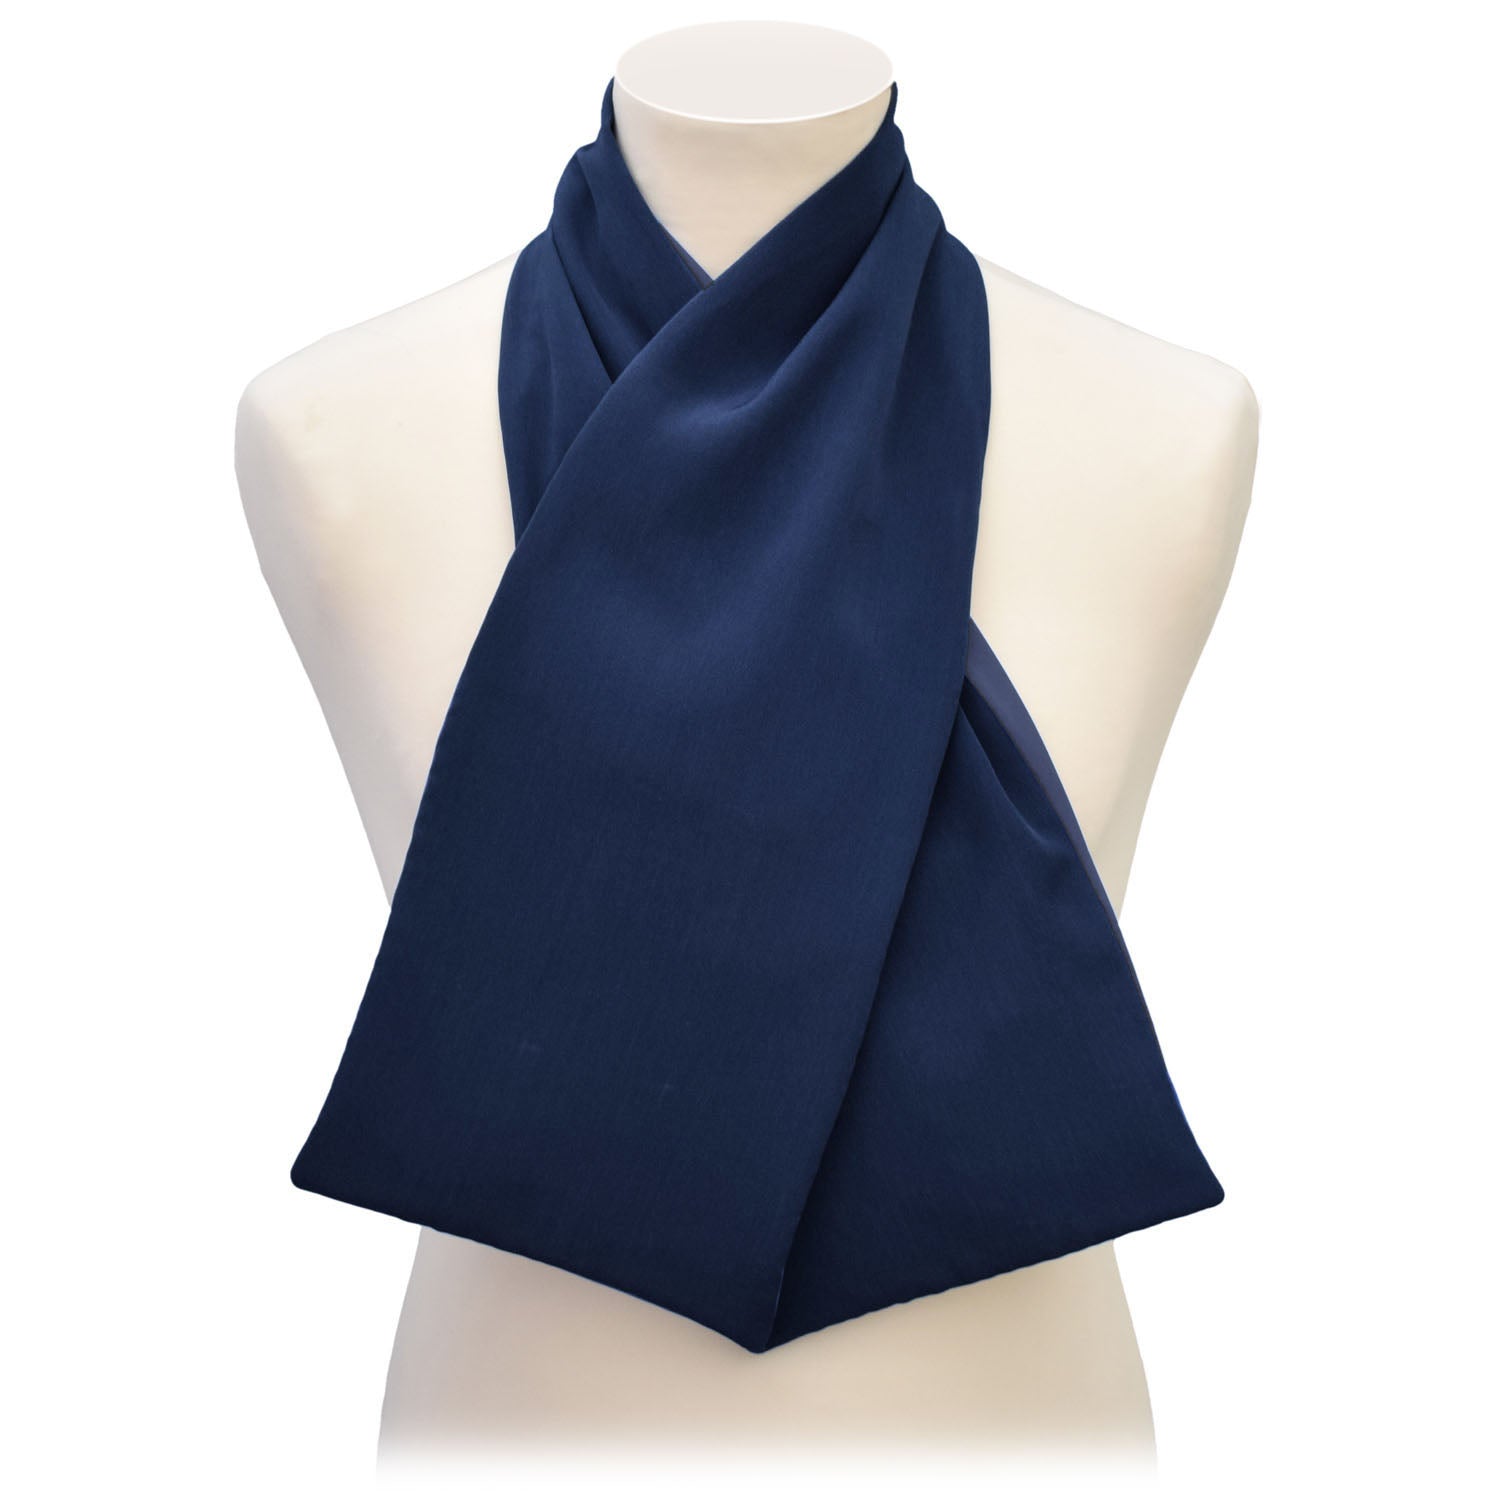 Cross Scarf Clothing Protector - Navy Blue (UK VAT Exempt) | Health Care | Care Designs